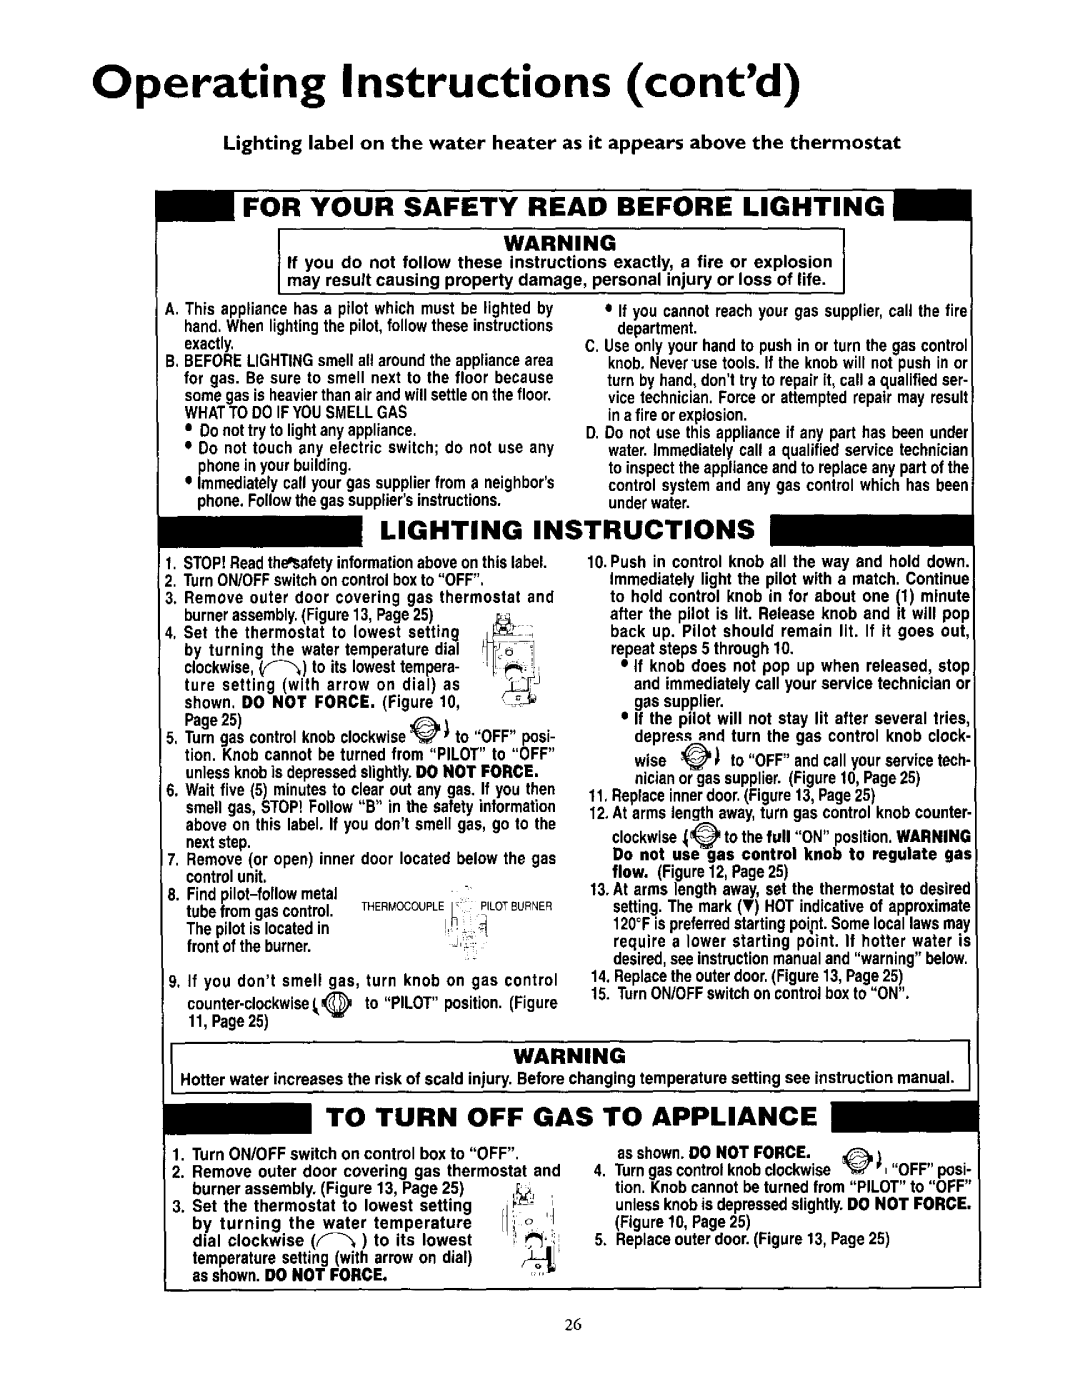 Kenmore 153.335943 Operating Instructions contd, For Your Safety Read Before Lighting, Lighting Instructions, To Appliance 